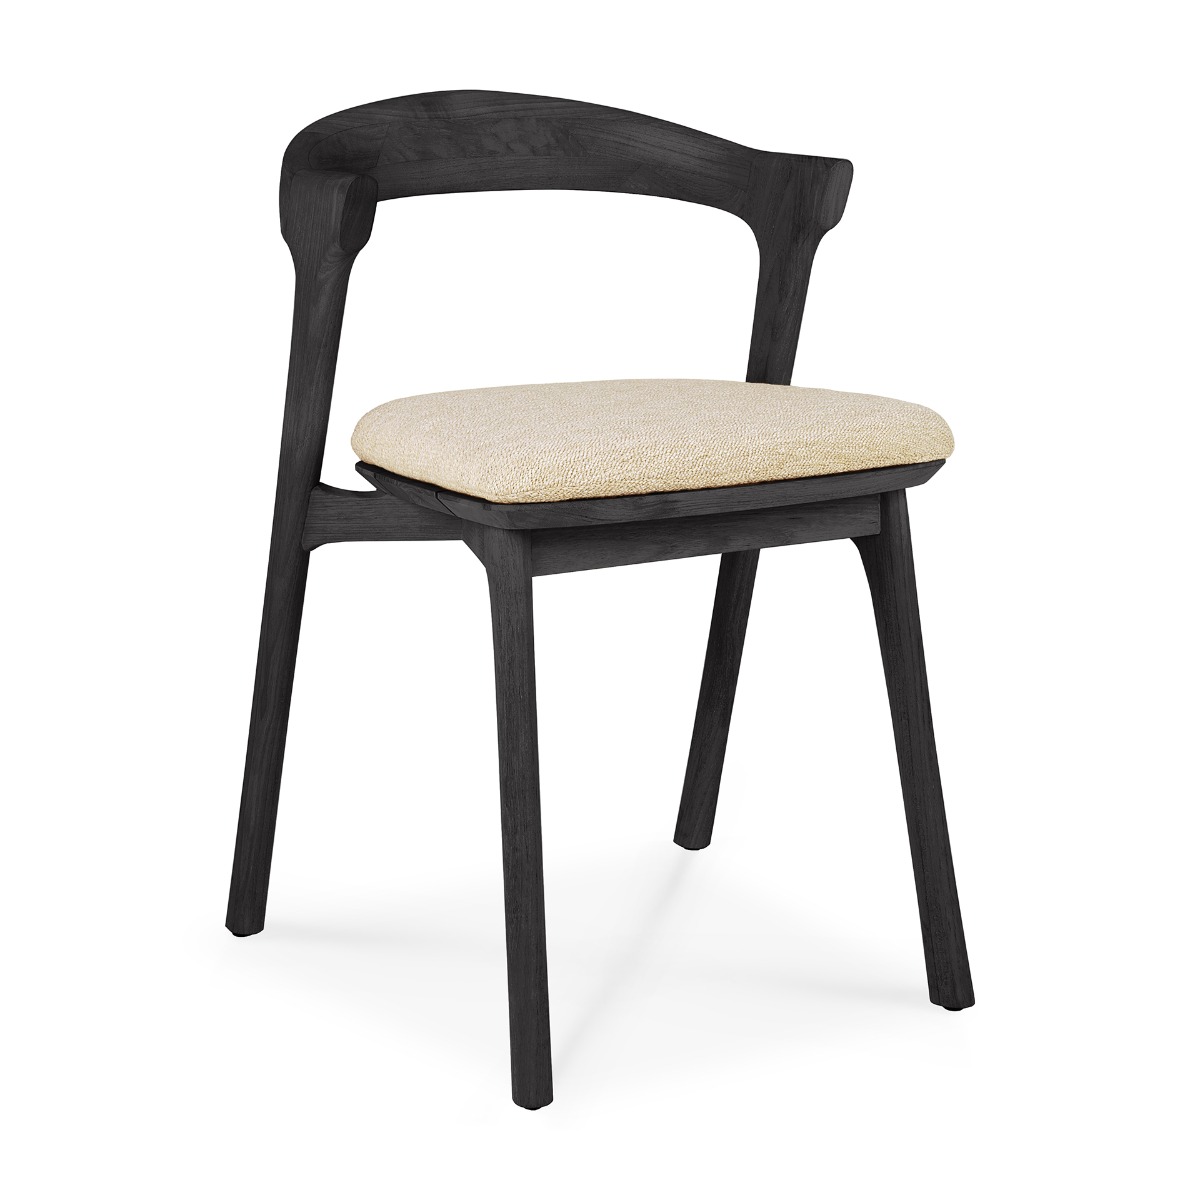 Teak Bok Black outdoor dining chair with cushion natural